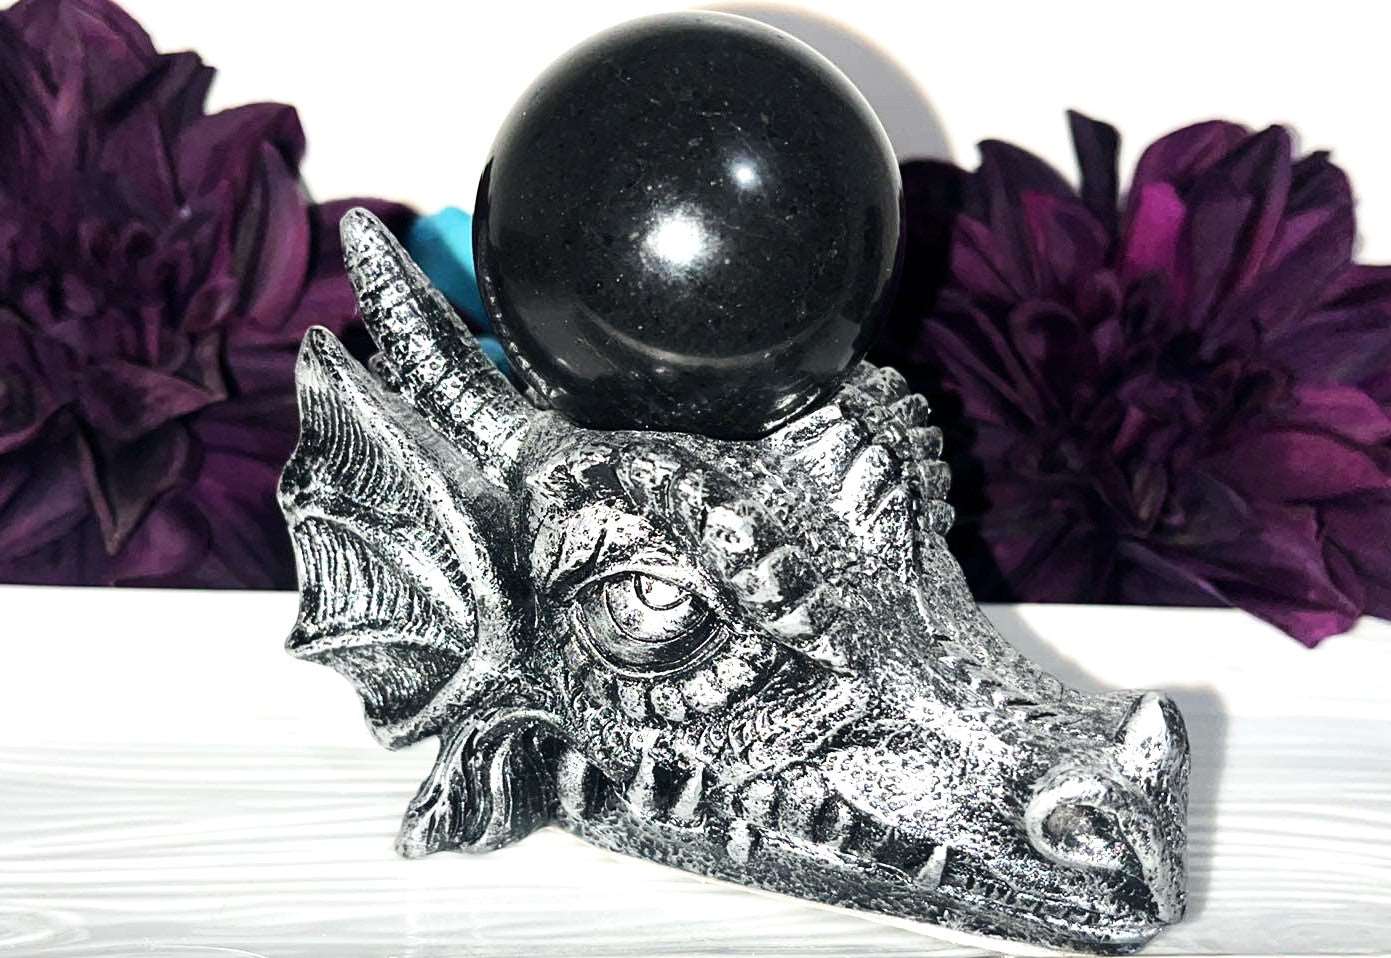 Dragon head crystal sphere holder stand. Holds many different sphere sizes. Gothic sphere, Dragon sphere holder, medieval